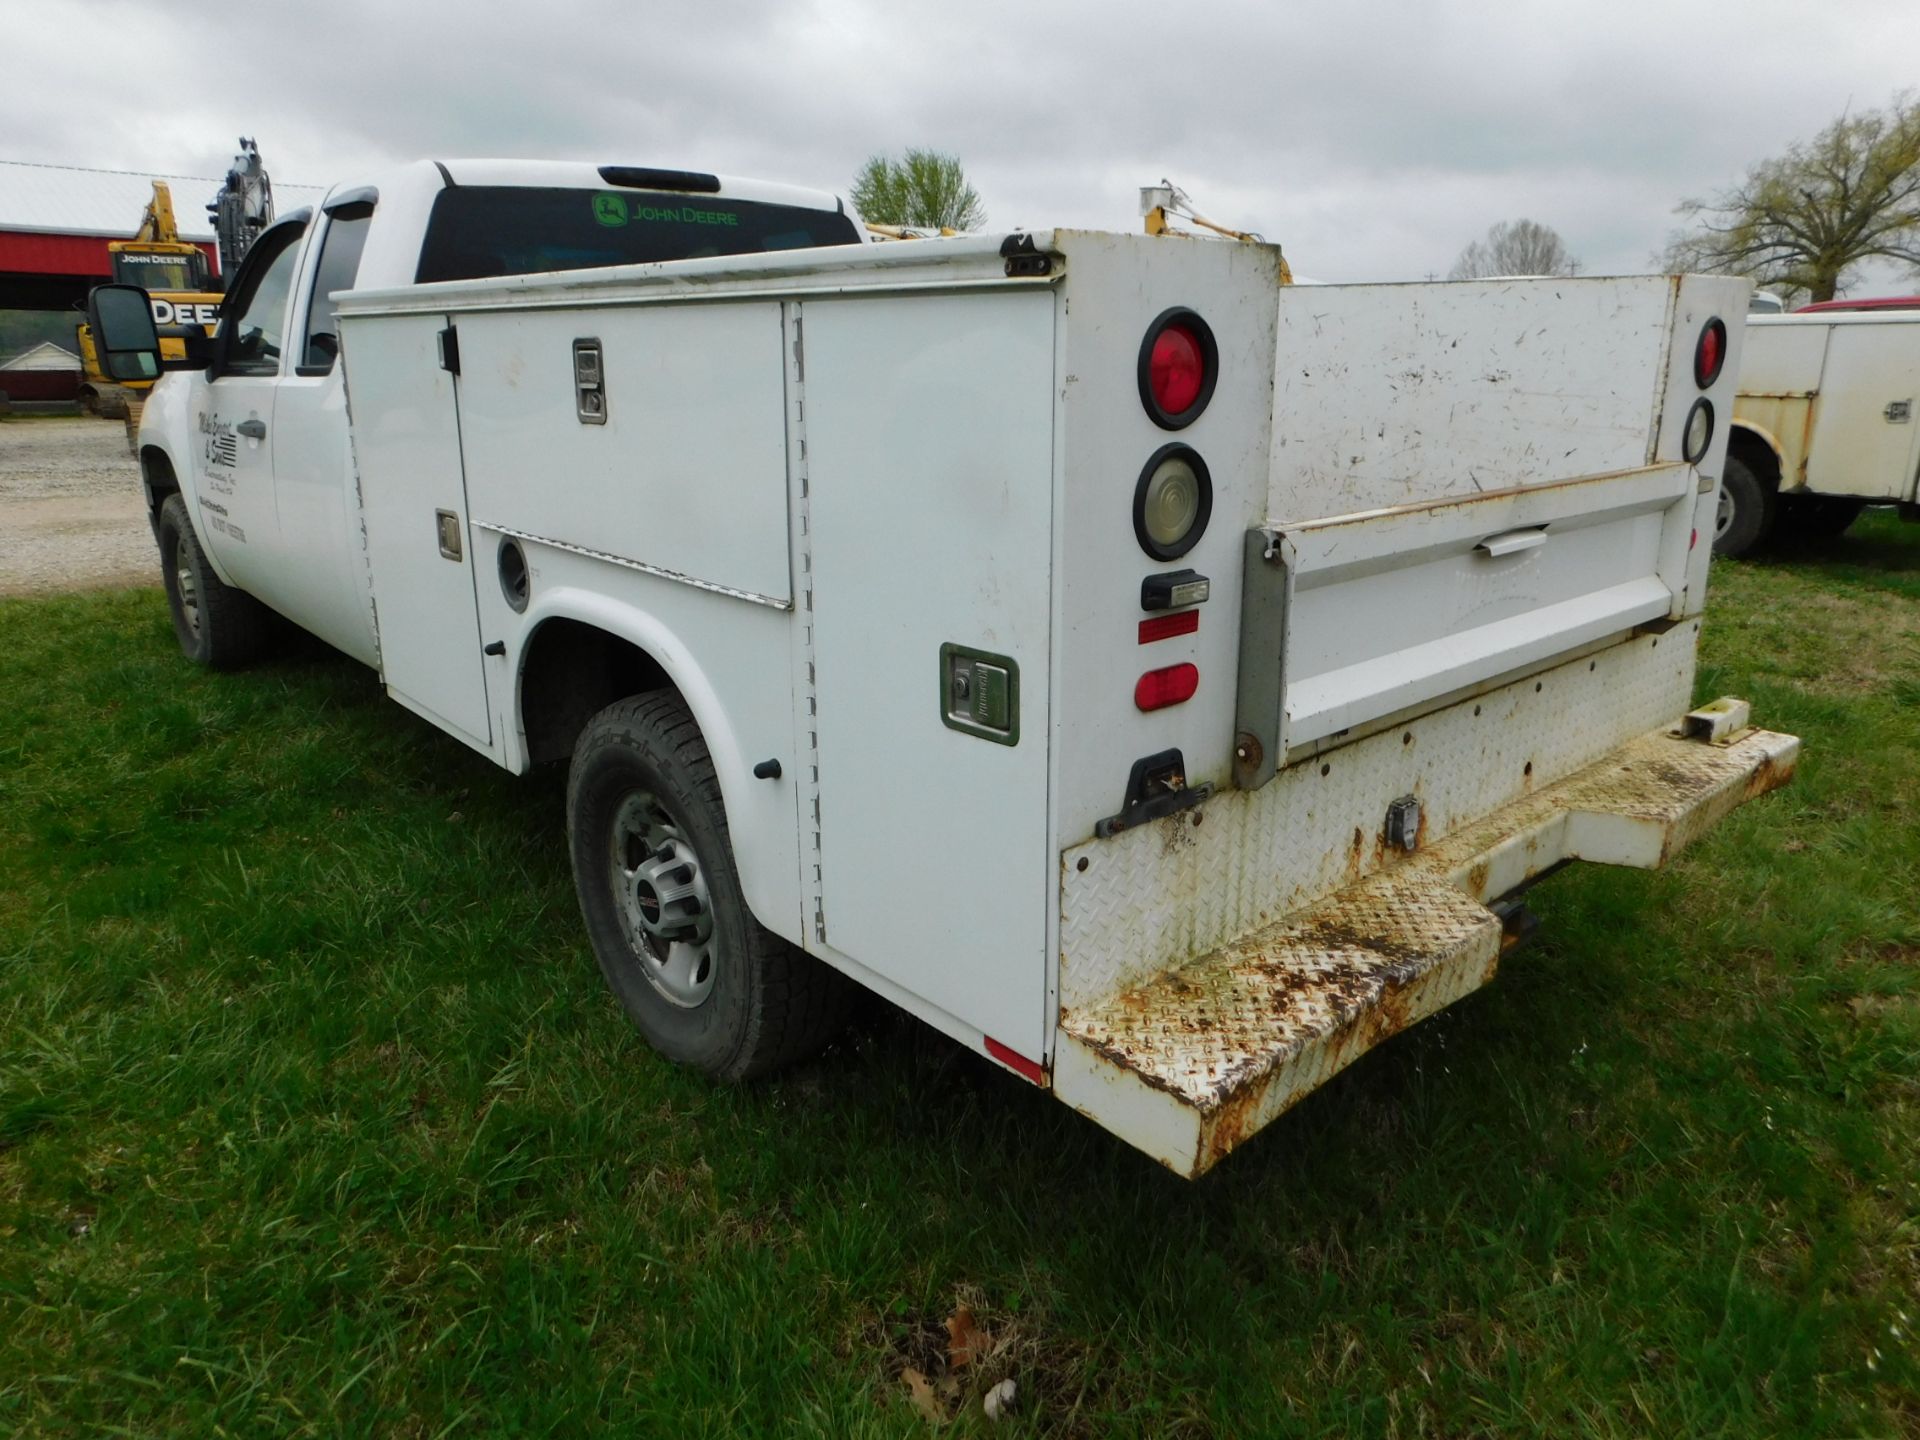 2008 GMC 2500HD Service Truck, VIN 1GTHK29K18E112995, Extended Cab, Automatic, 4 WD, AC, AM/FM, 6.0L - Image 8 of 22